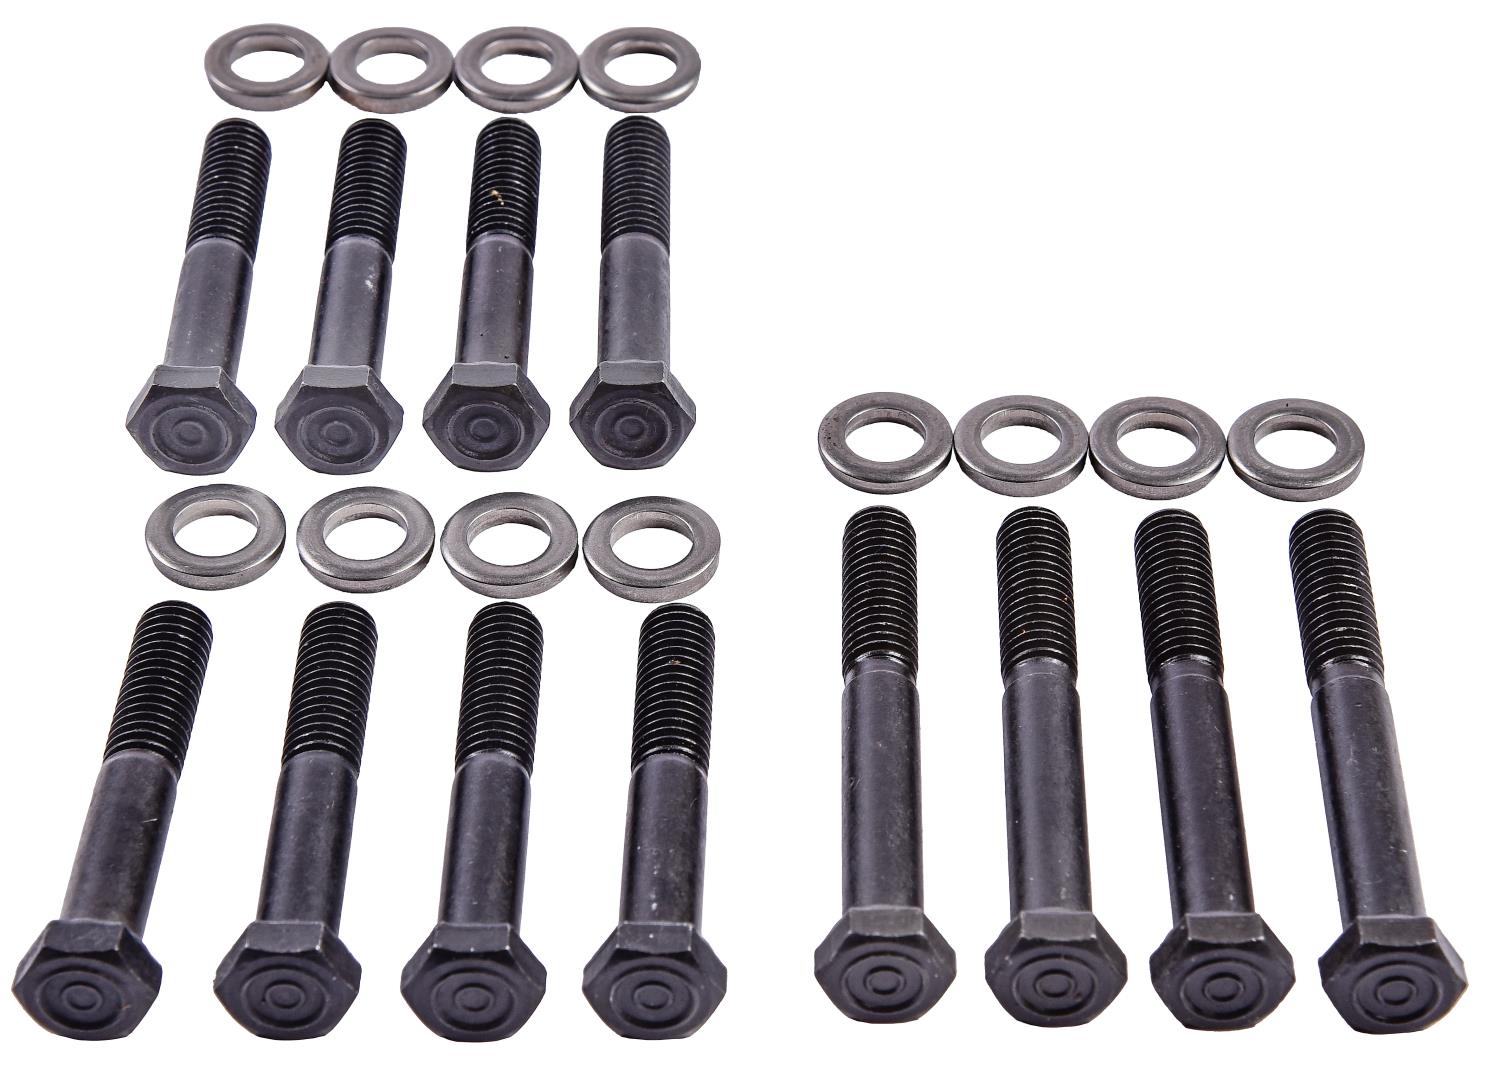 Exhaust Manifold Bolt Kit for 1957-1966 Small Block Chevy Engines